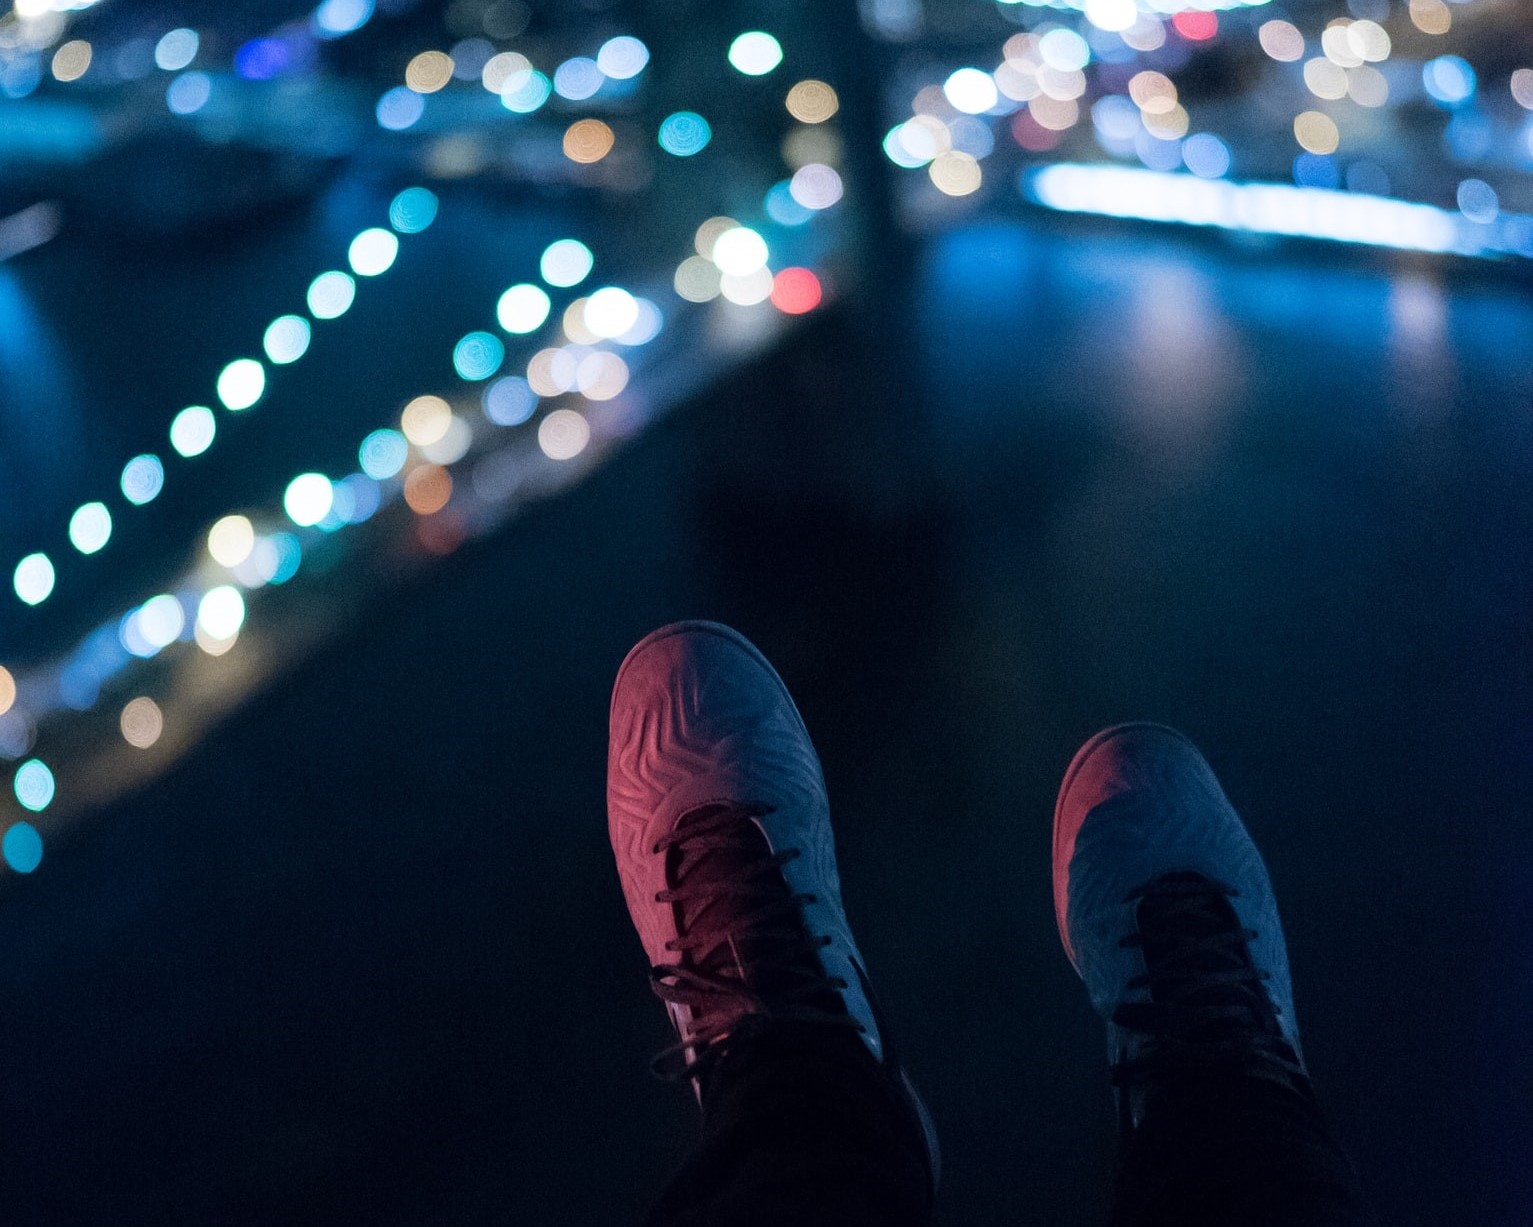 Photo of a pair of shoes dangling off the edge of a building while lights shine on a bridge in the distance at night.